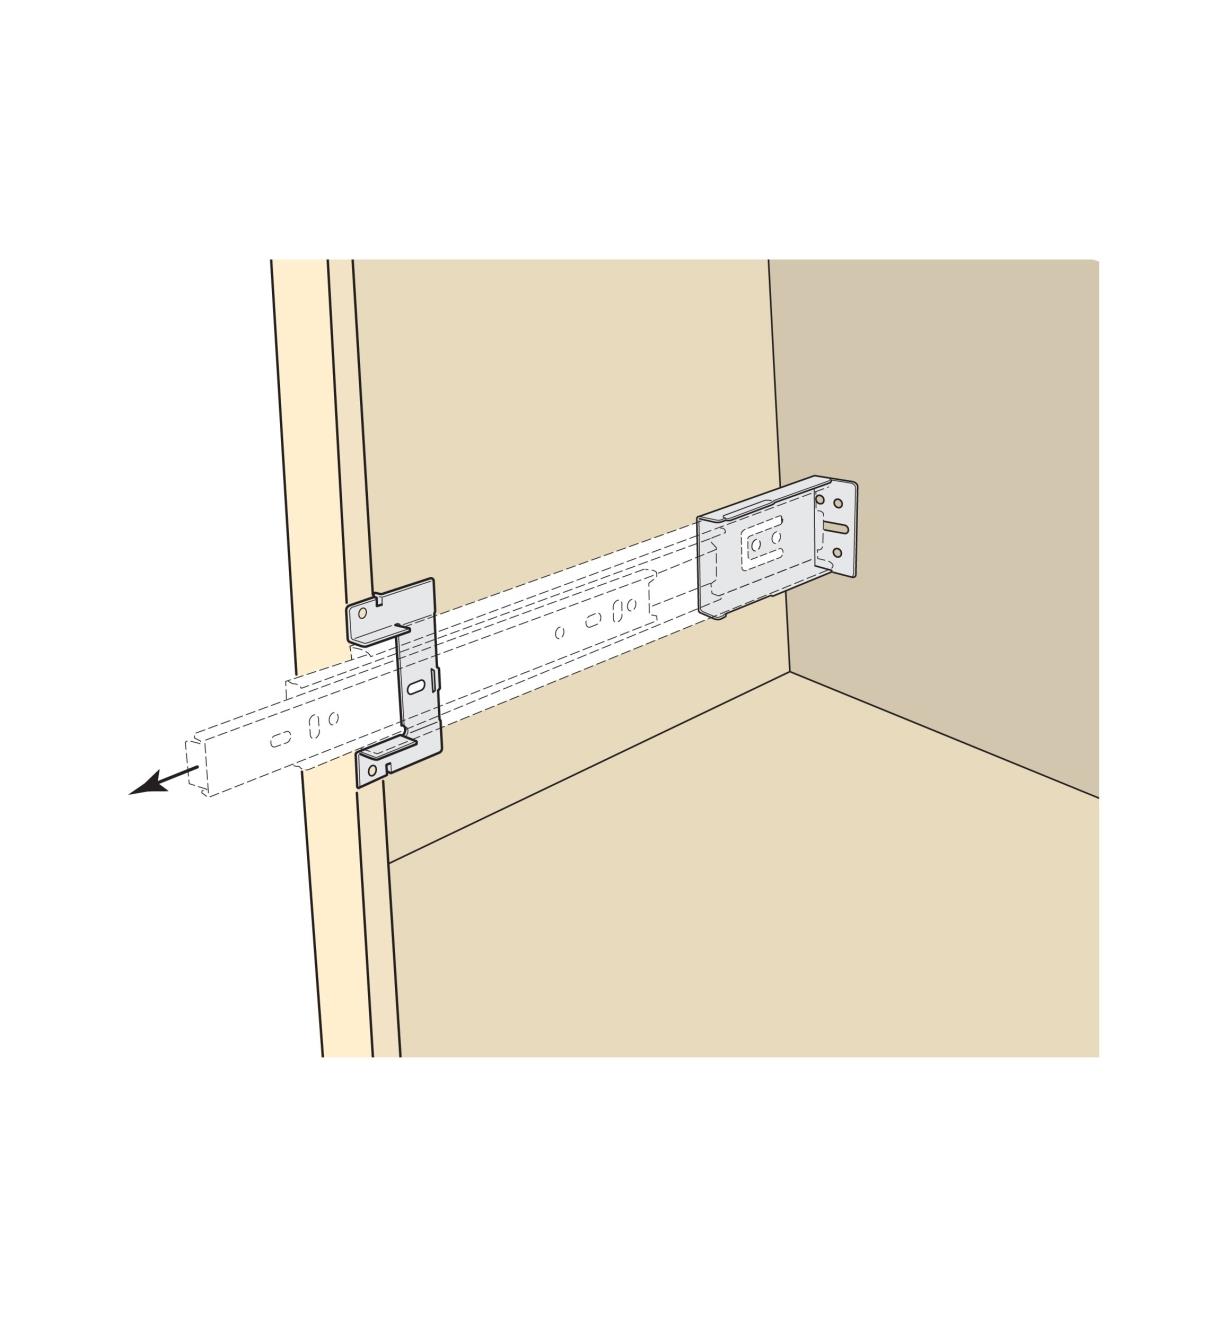 Illustration of brackets used to attach a slide to a cabinet wall